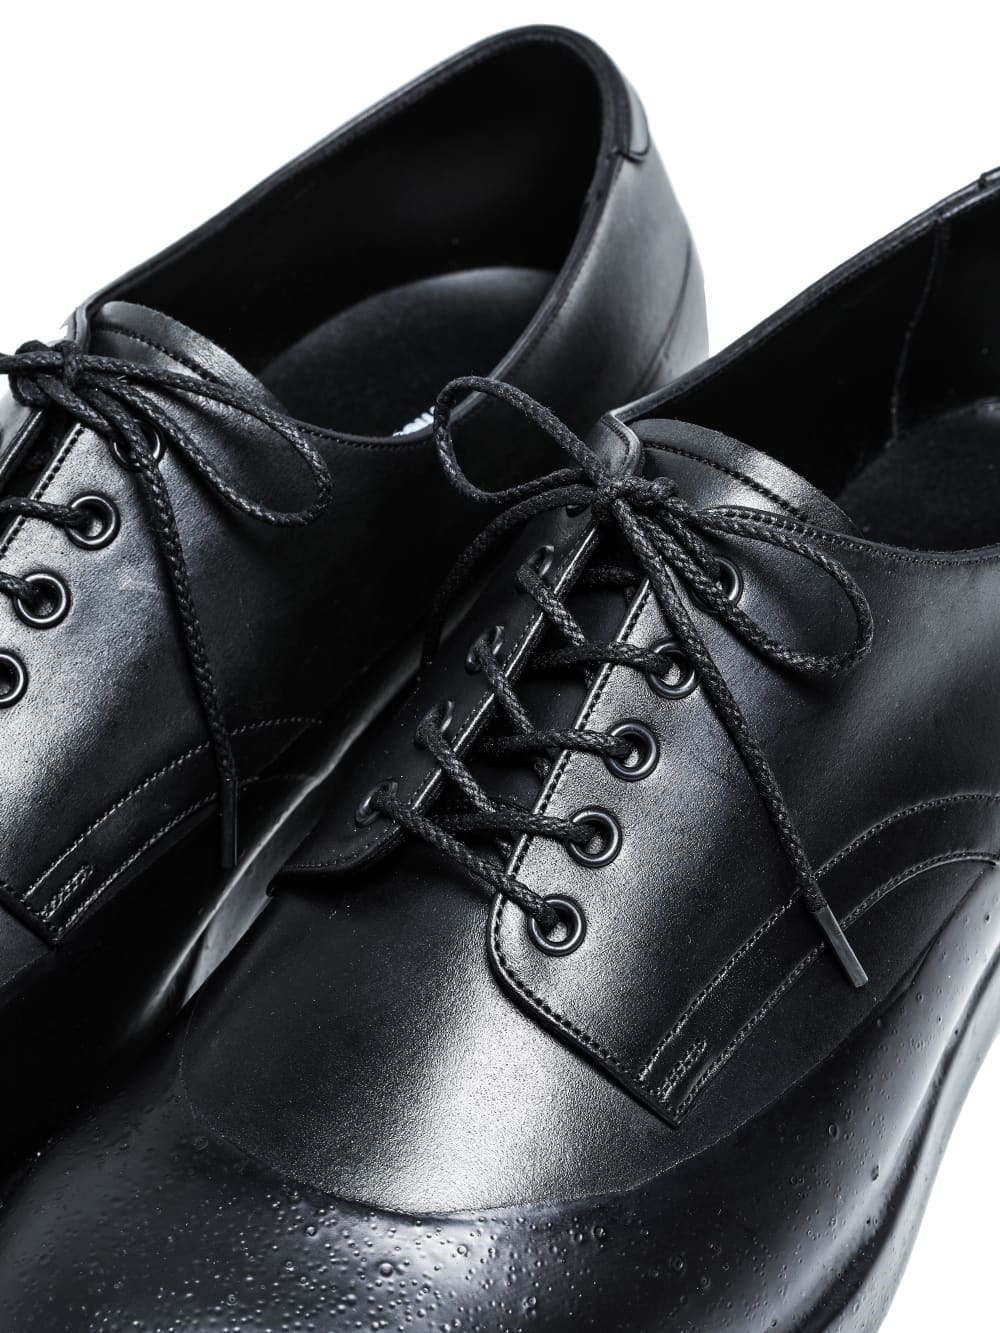 sf.0001SS23_black derby shoe. TheSoloist. official online store